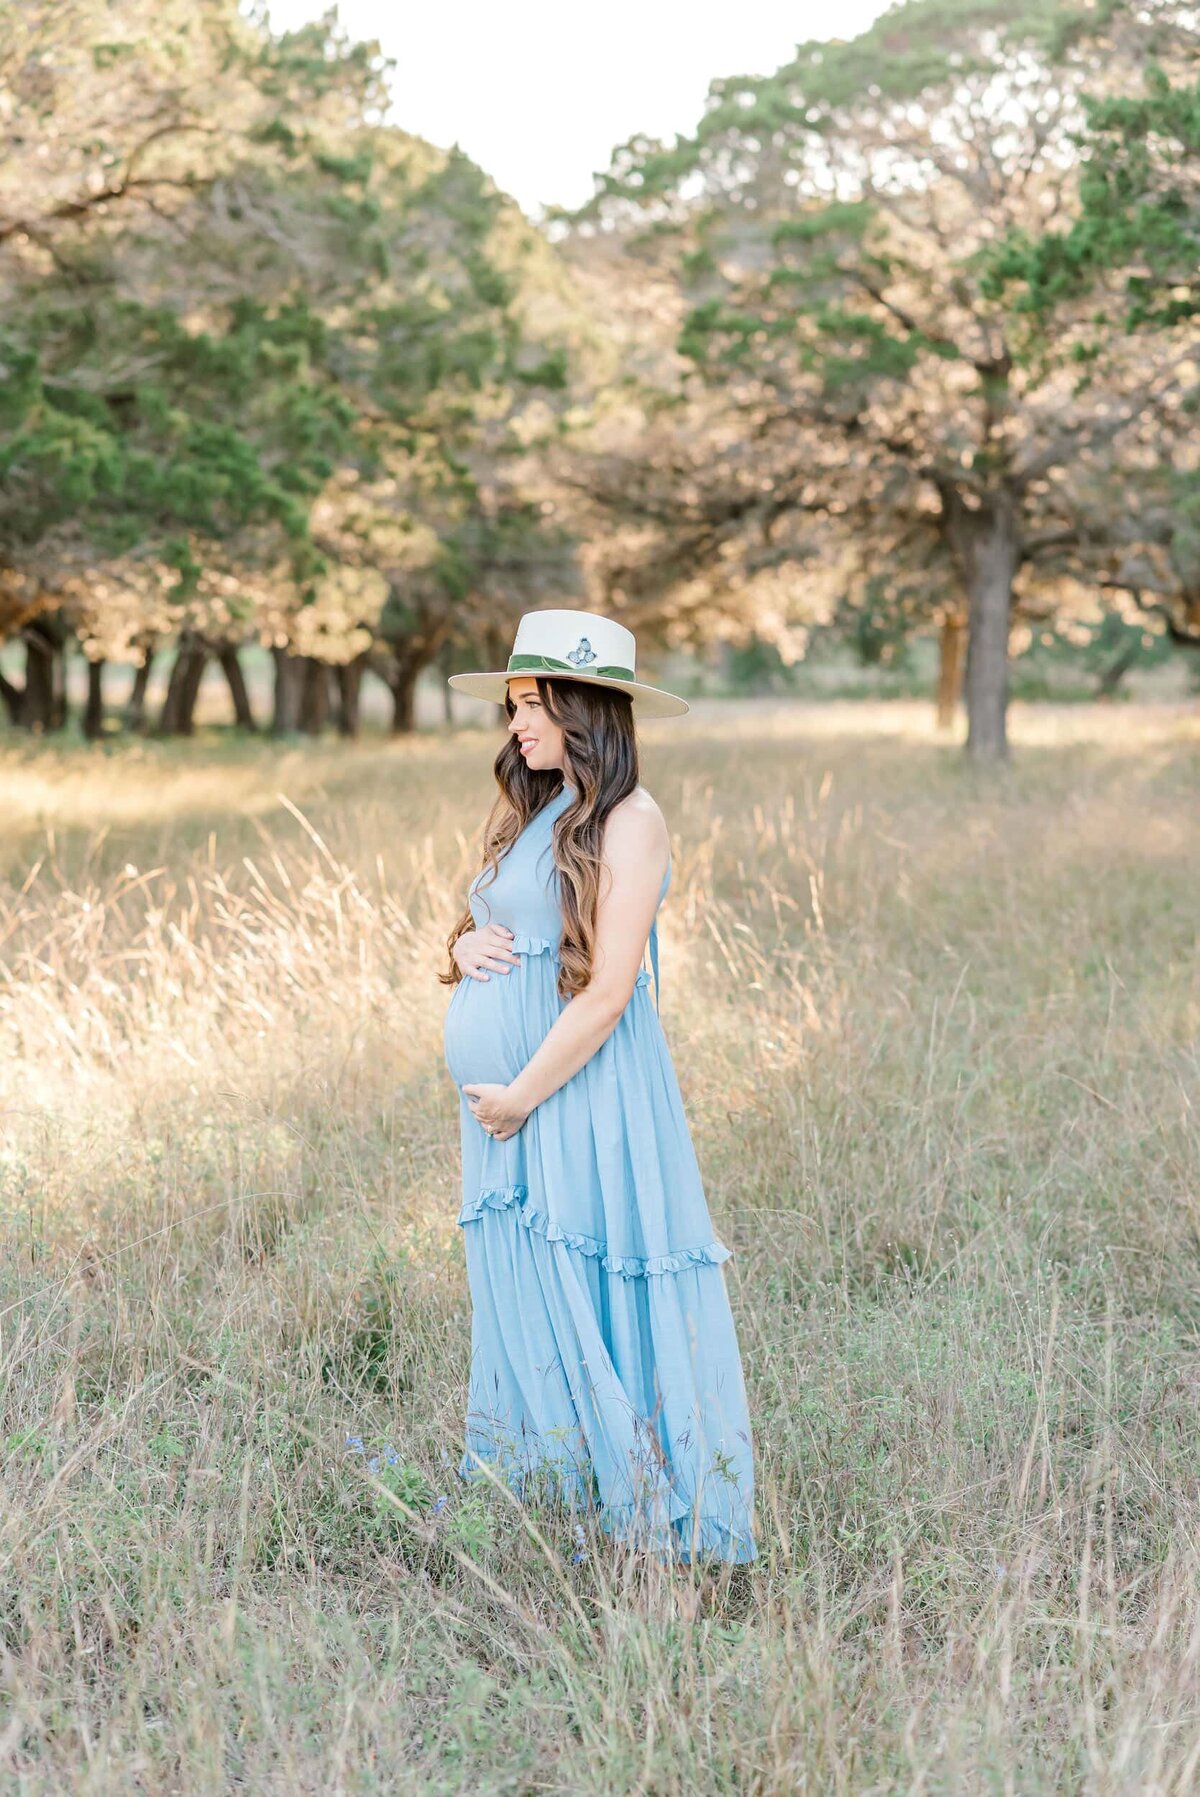 San-Antonio-Maternity-Photography-11.17.21 Sarah Maternity - Laurie Adalle Photography-33